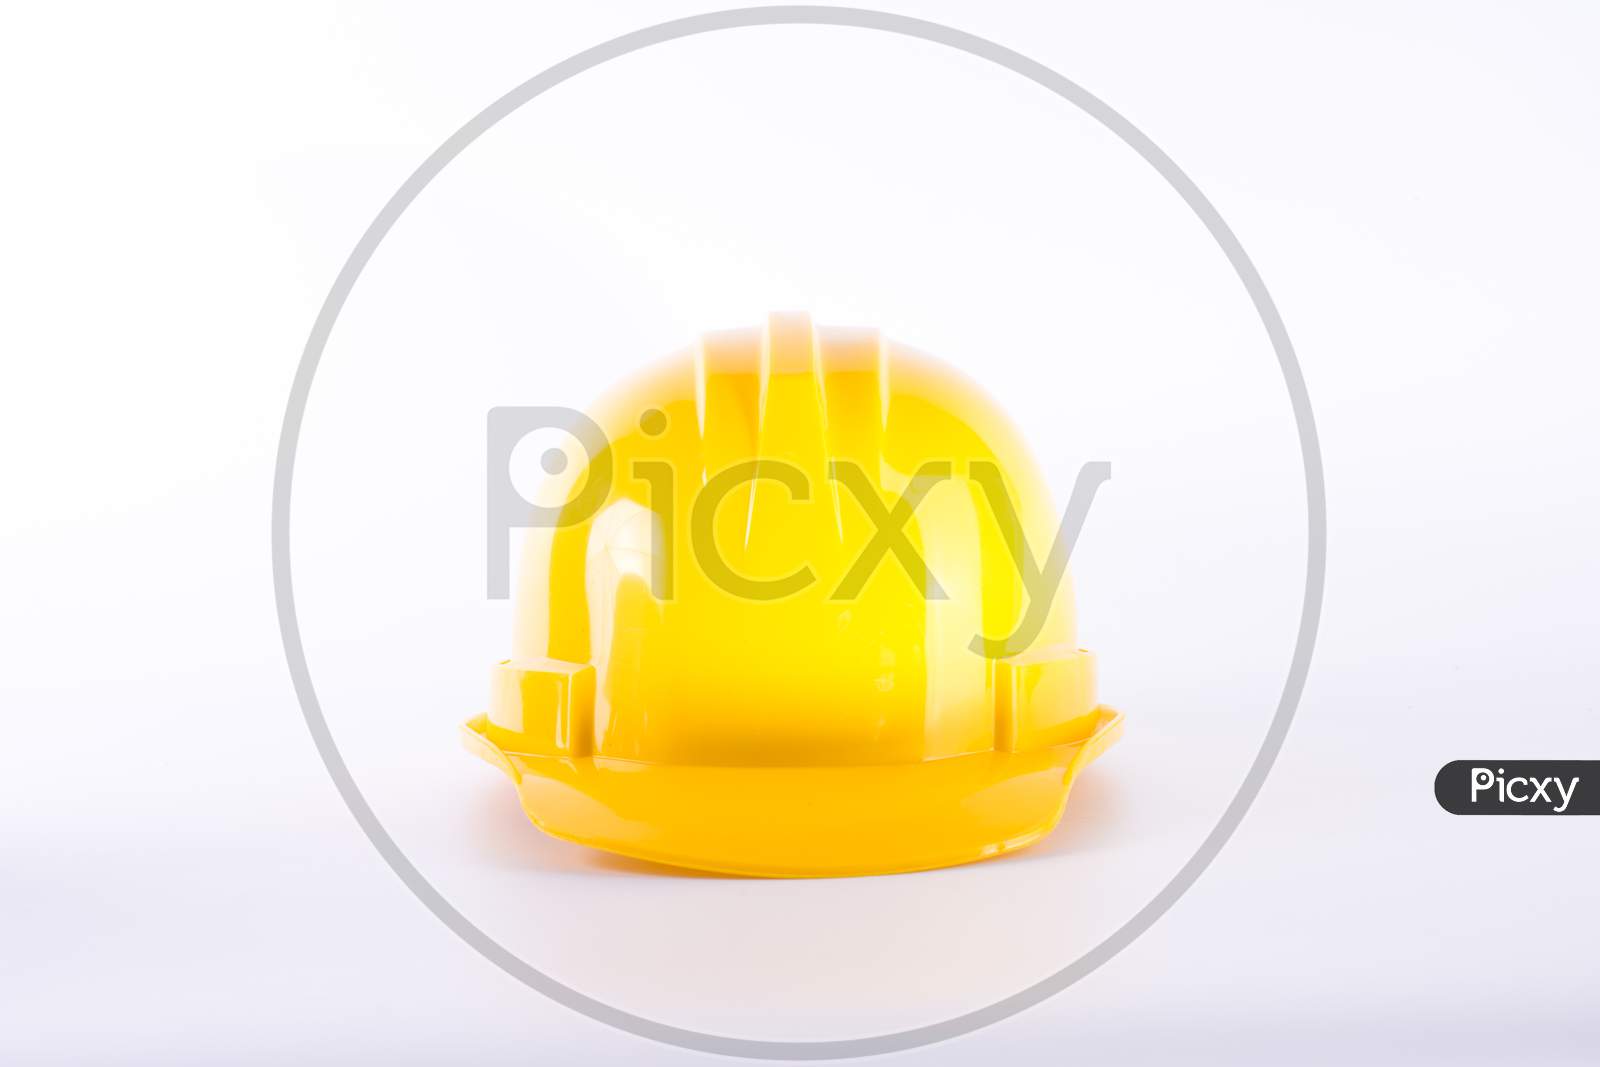 Yellow Safety Helmet On White Background. Hard Hat Isolated On White. Safety Equipment Concept. Worker And Industrial Theme.